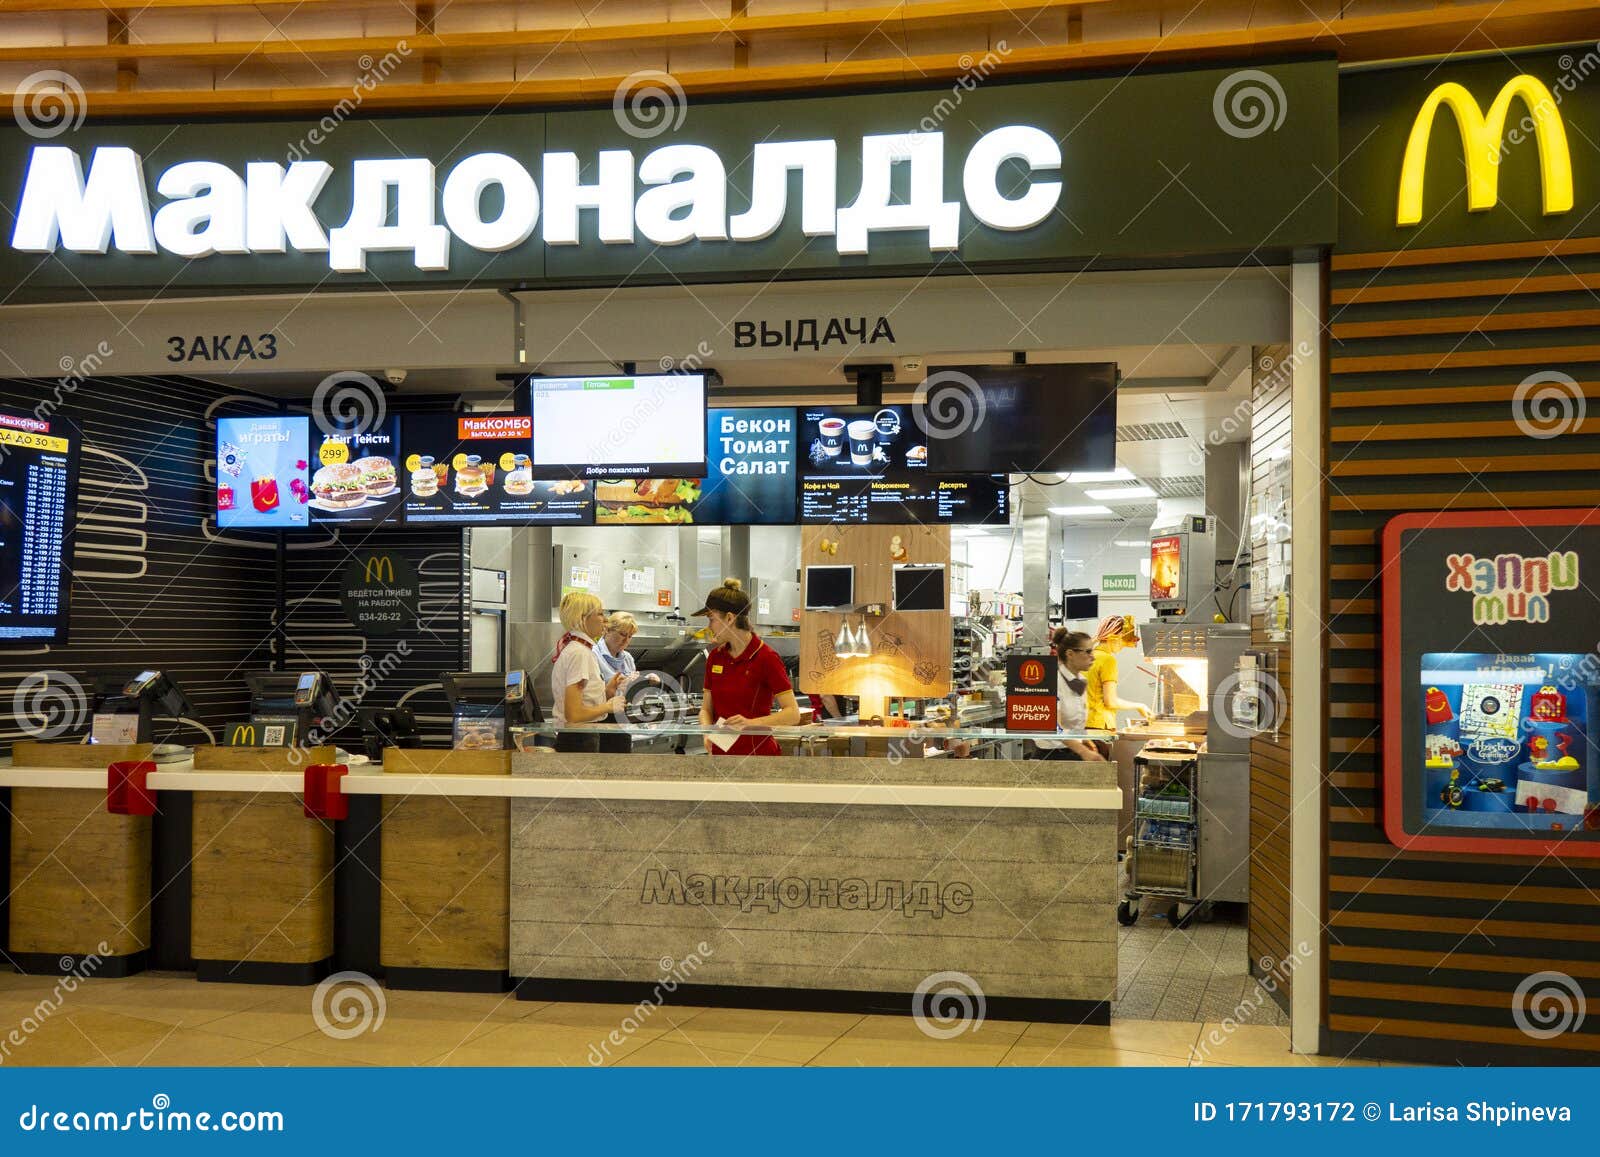 7 043 Fast Food Restaurant Interior Photos Free Royalty Free Stock Photos From Dreamstime